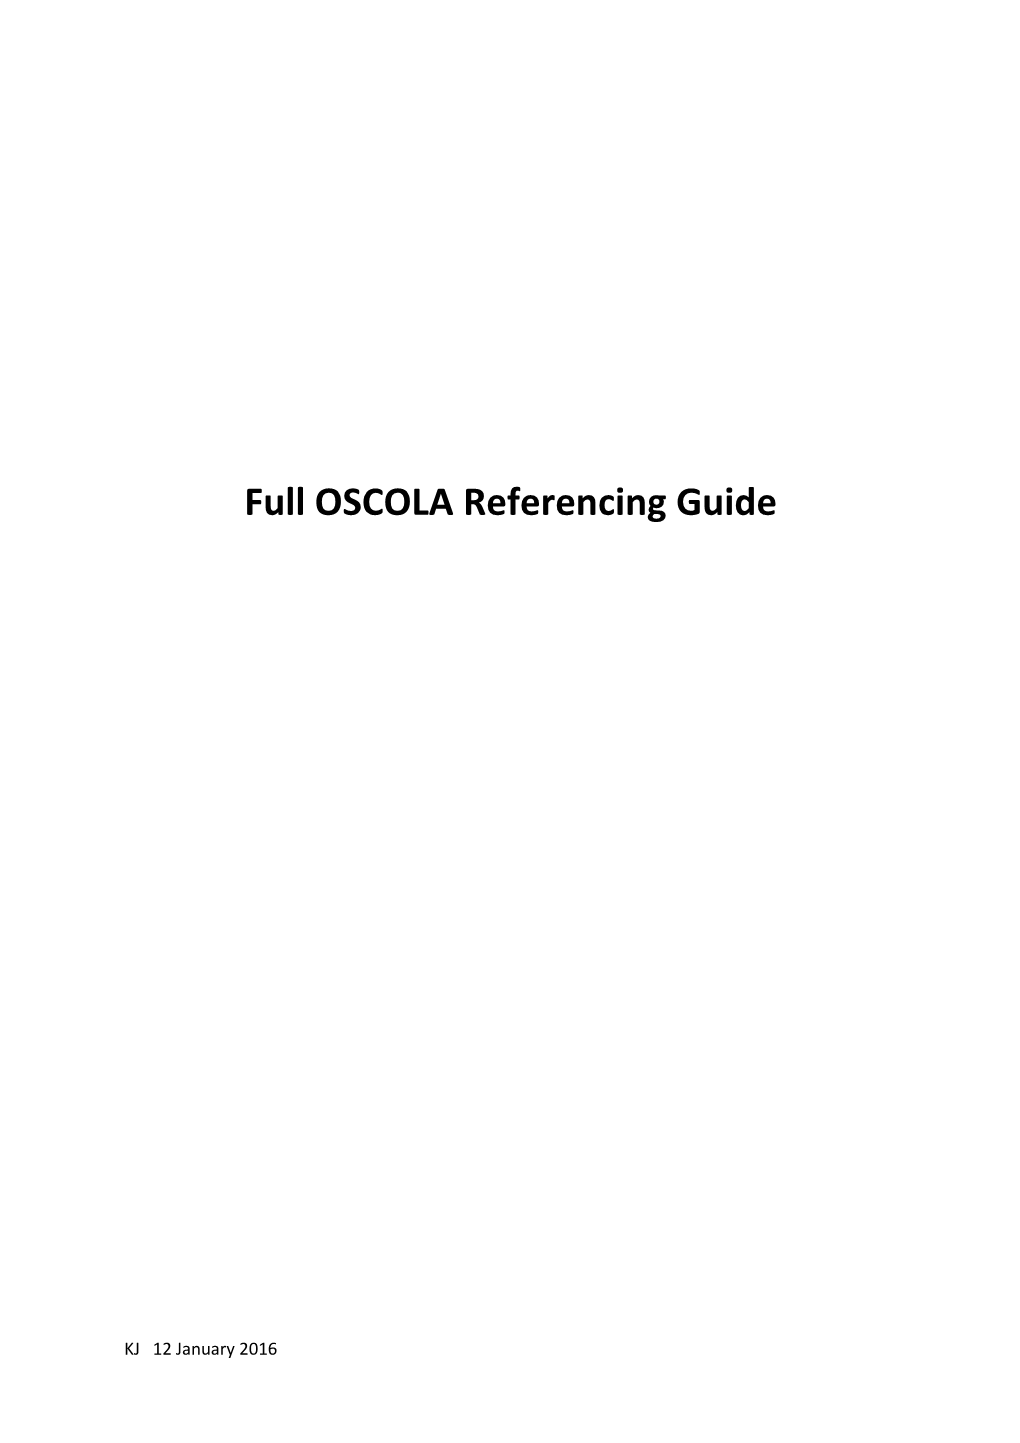 Full OSCOLA Referencing Guide Referencing Guide for OSCOLA (Oxford Standard for Citation